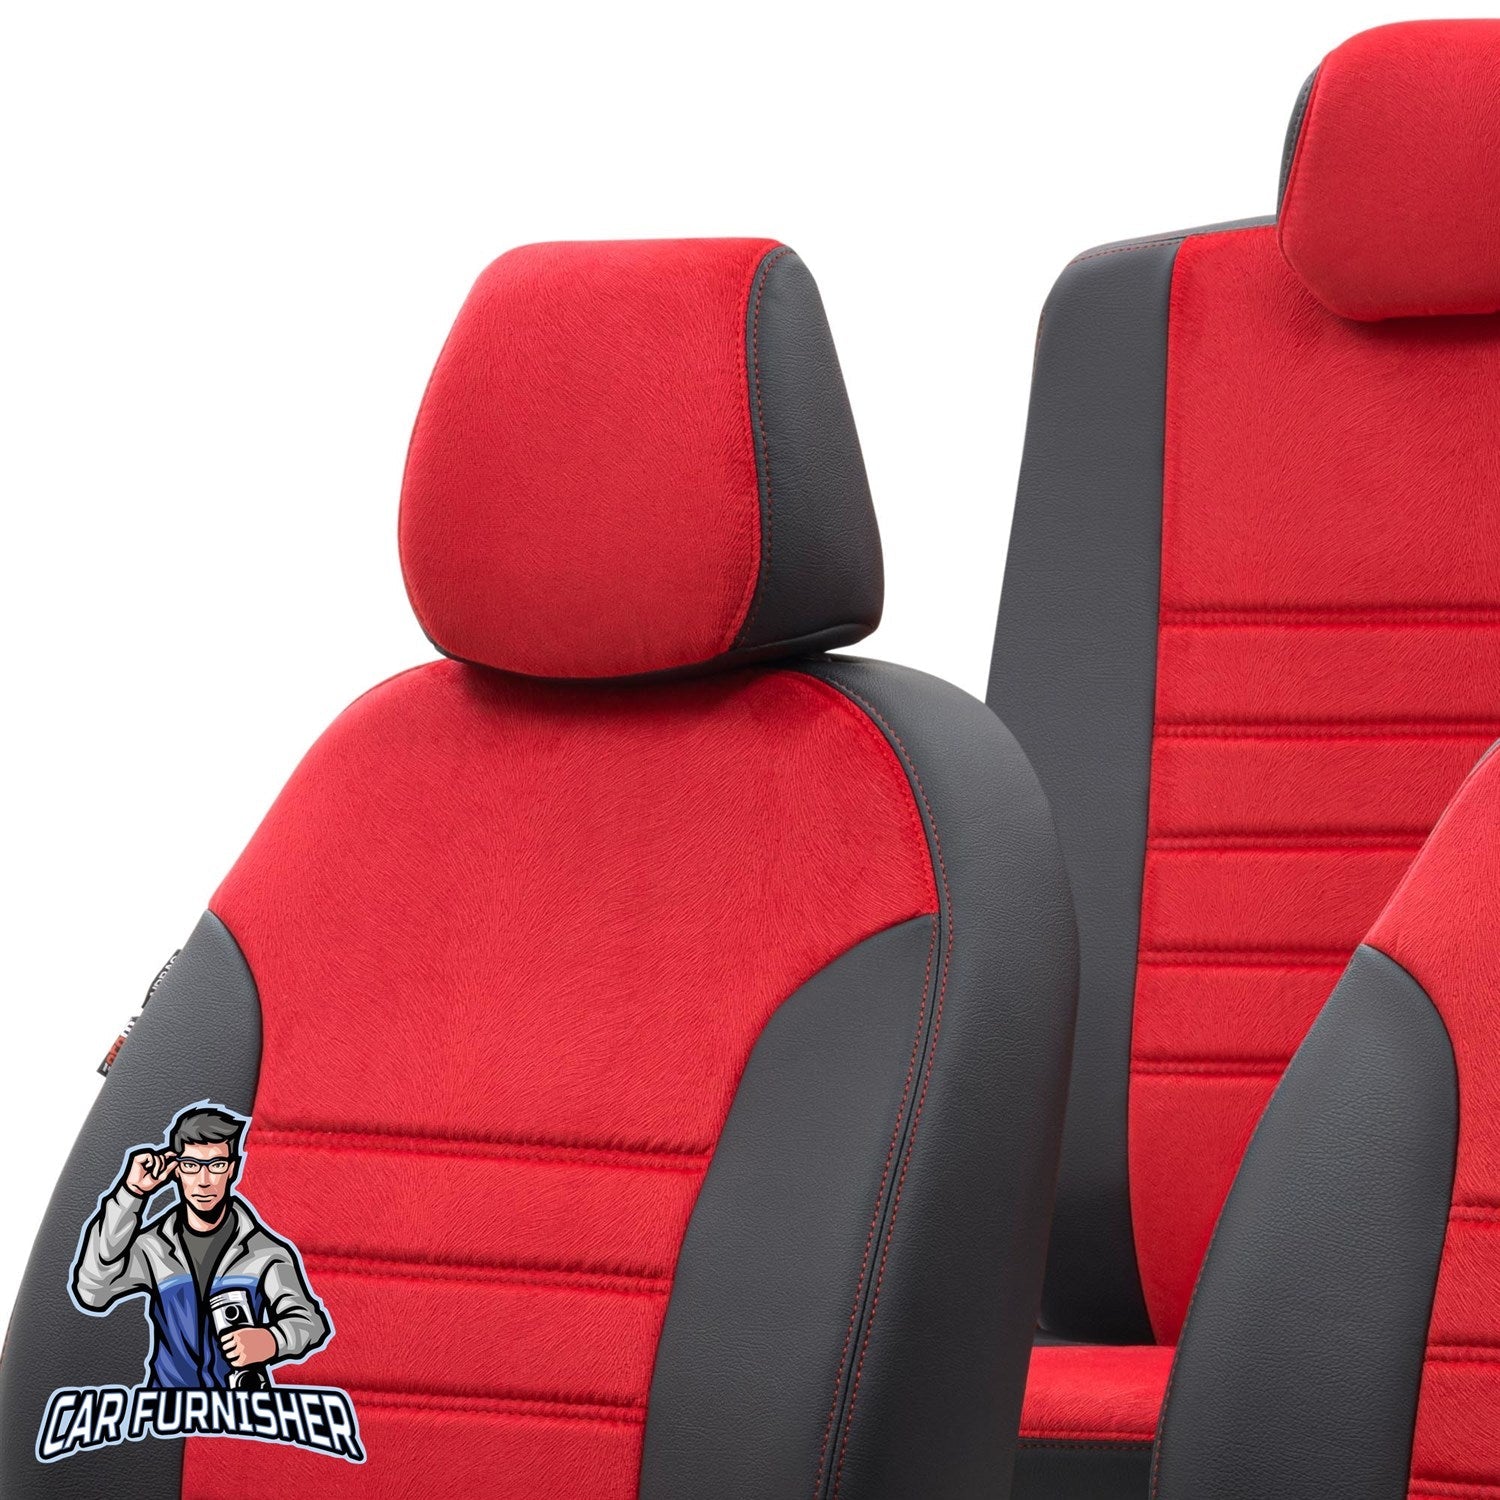 Volvo V40 Car Seat Cover 2013-2023 T2/T3/T4/T5/D2/D3 London Design Smoked Black Full Set (5 Seats + Handrest) Leather & Fabric